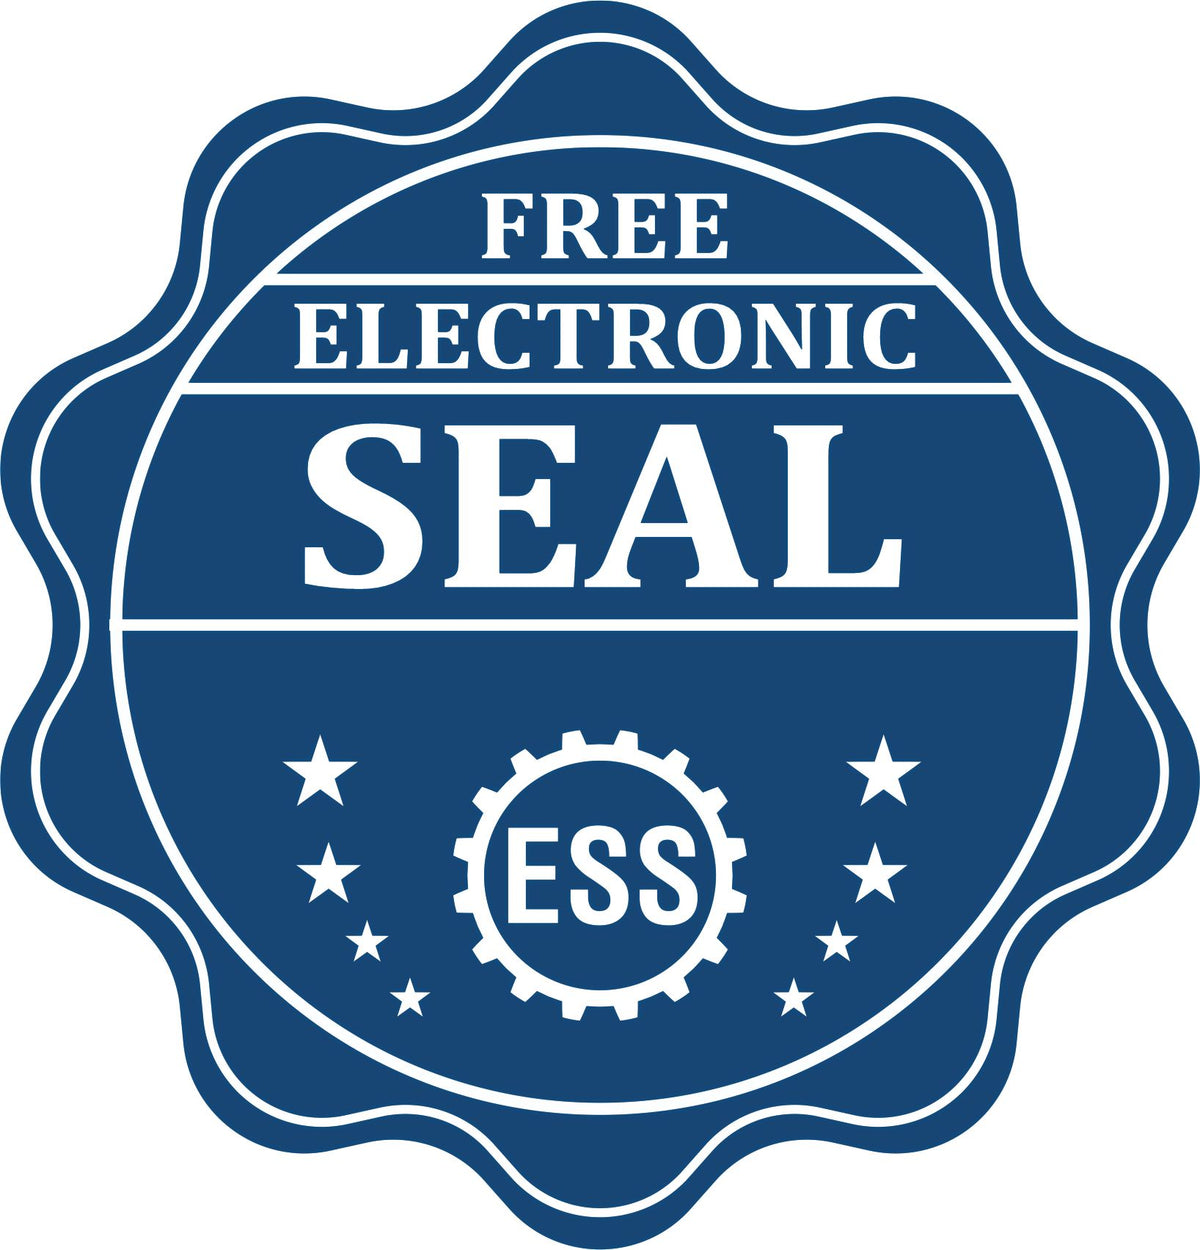 A badge showing a free electronic seal for the Slim Pre-Inked Rectangular Notary Stamp for Missouri with stars and the ESS gear on the emblem.